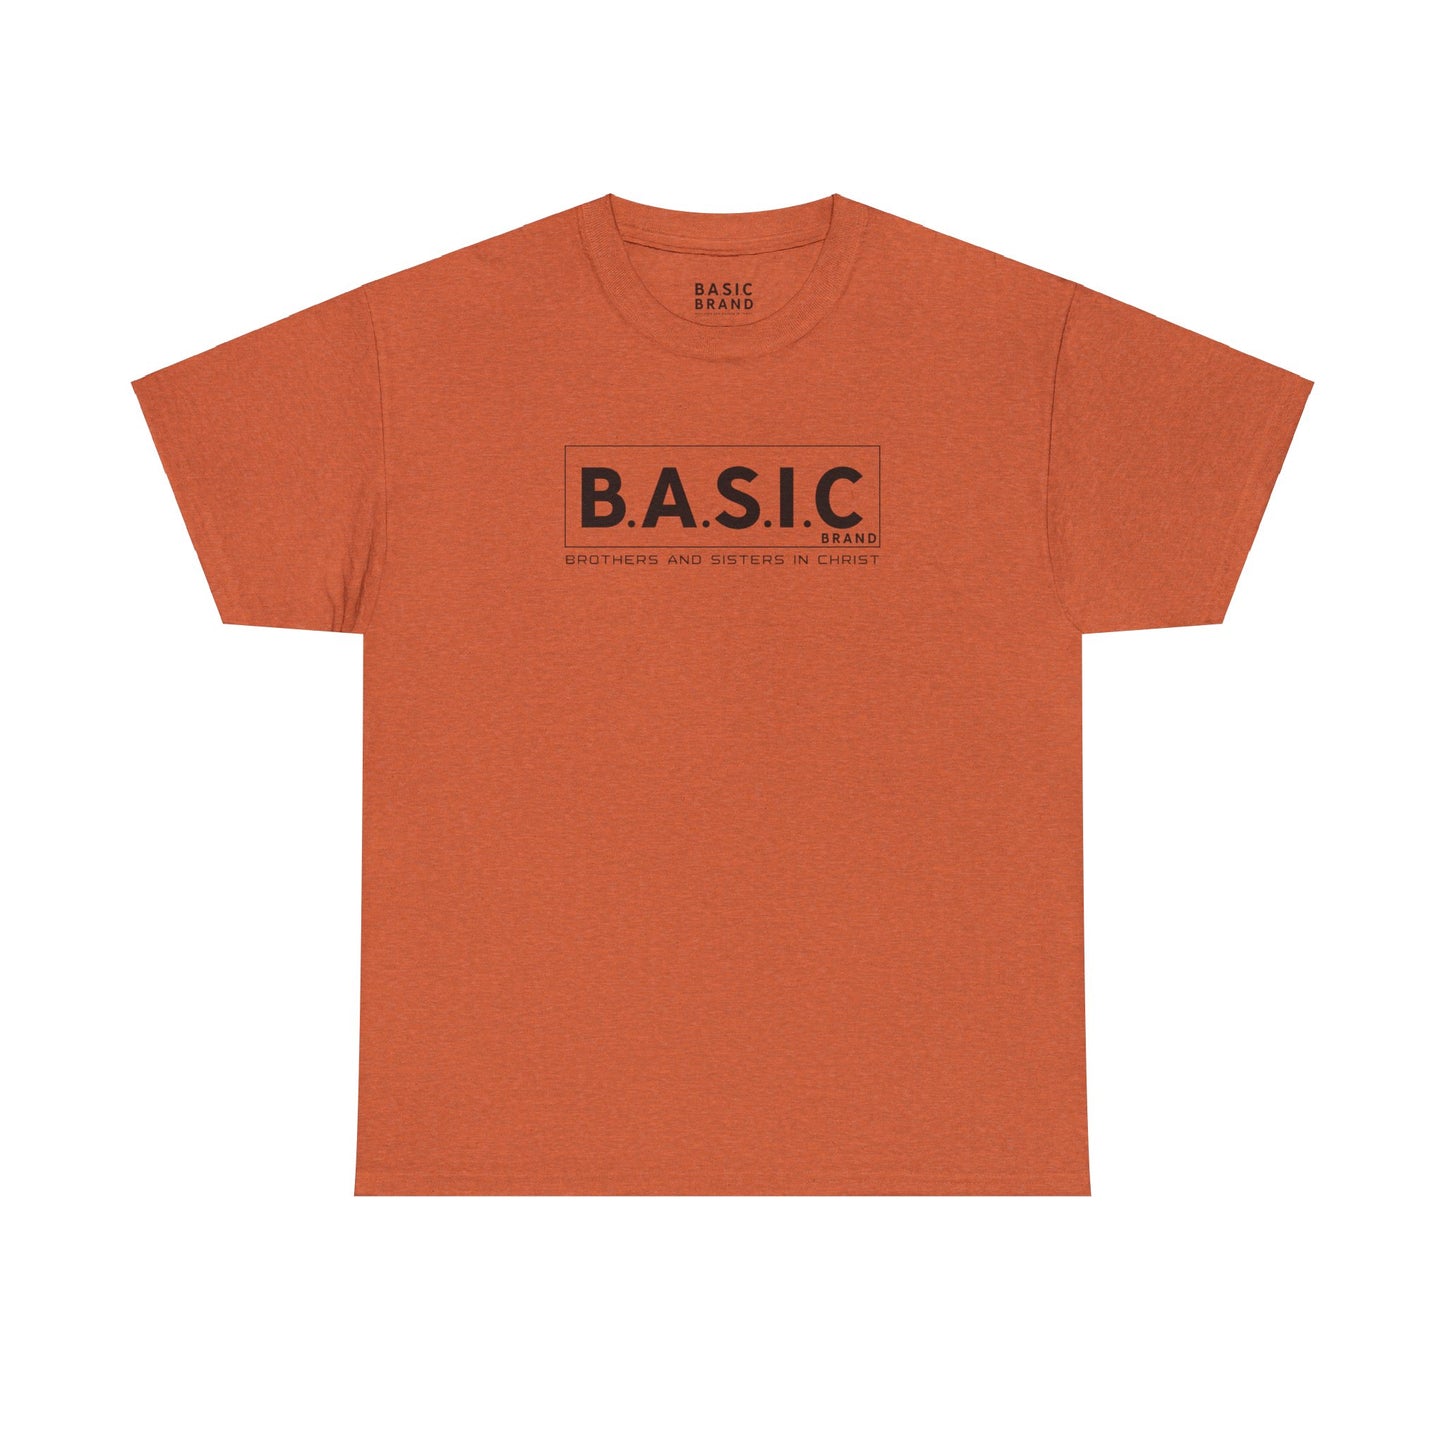 Unisex B.A.S.I.C "Brothers and Sisters in Chirst Original" Tee Shirt